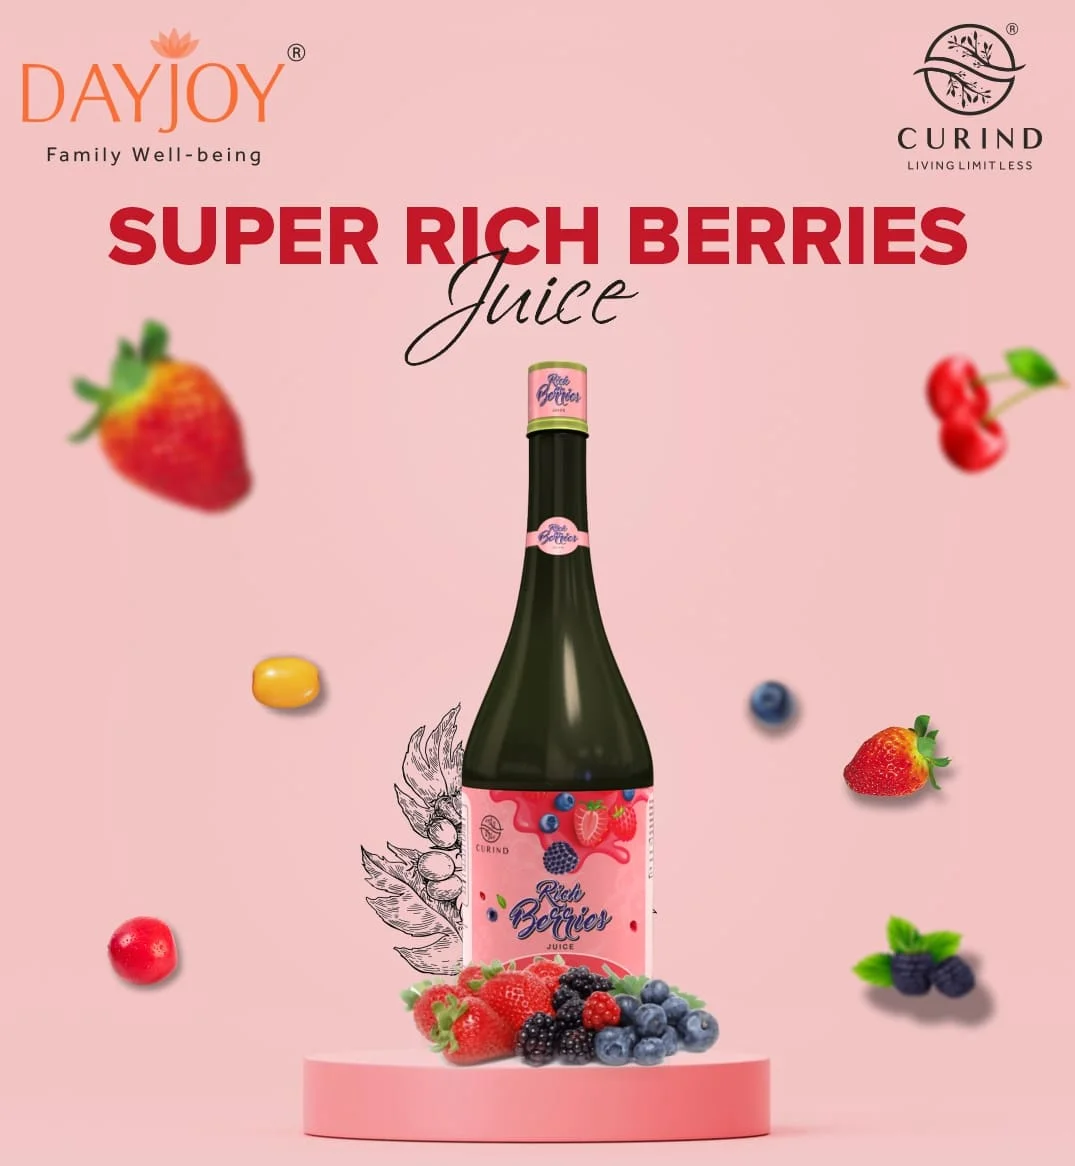 Rich Berries have multiple nutritional benefits such as improved immunity, blood sugar control, and fighting obesity.